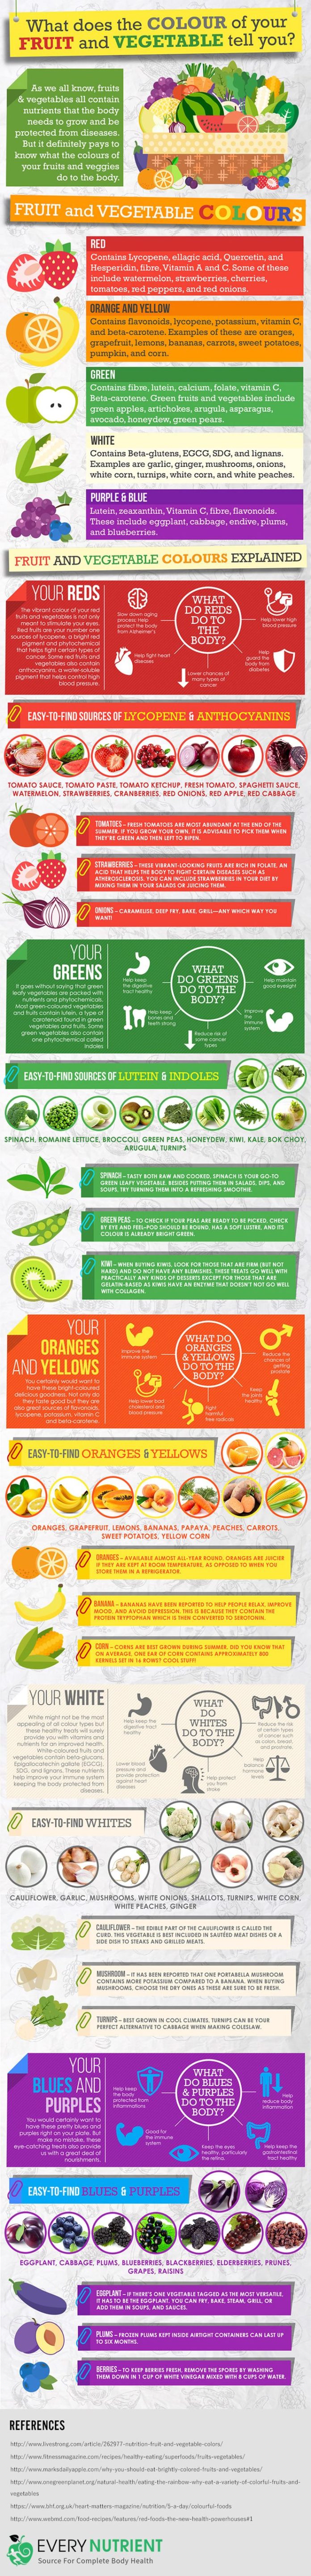 Food infographic - Healthy Eating in Living Color - InfographicNow.com ...